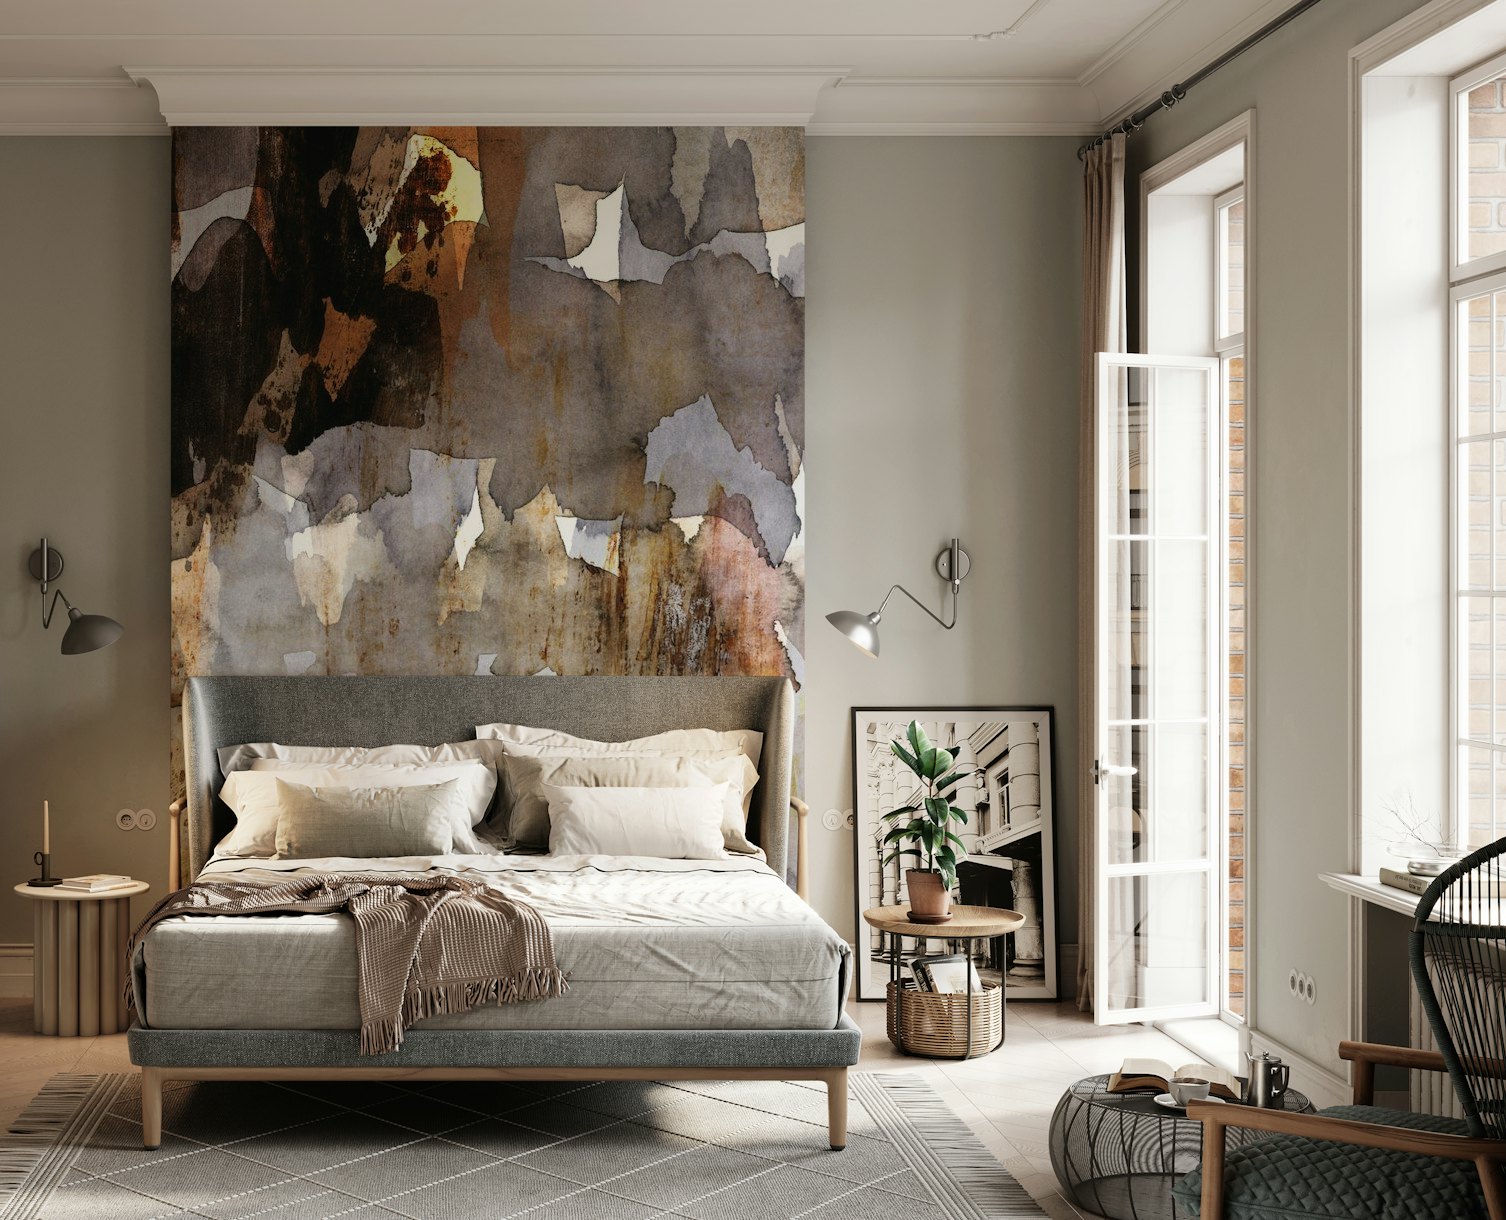 Organic wall mural featuring warm tones and nature-inspired textures